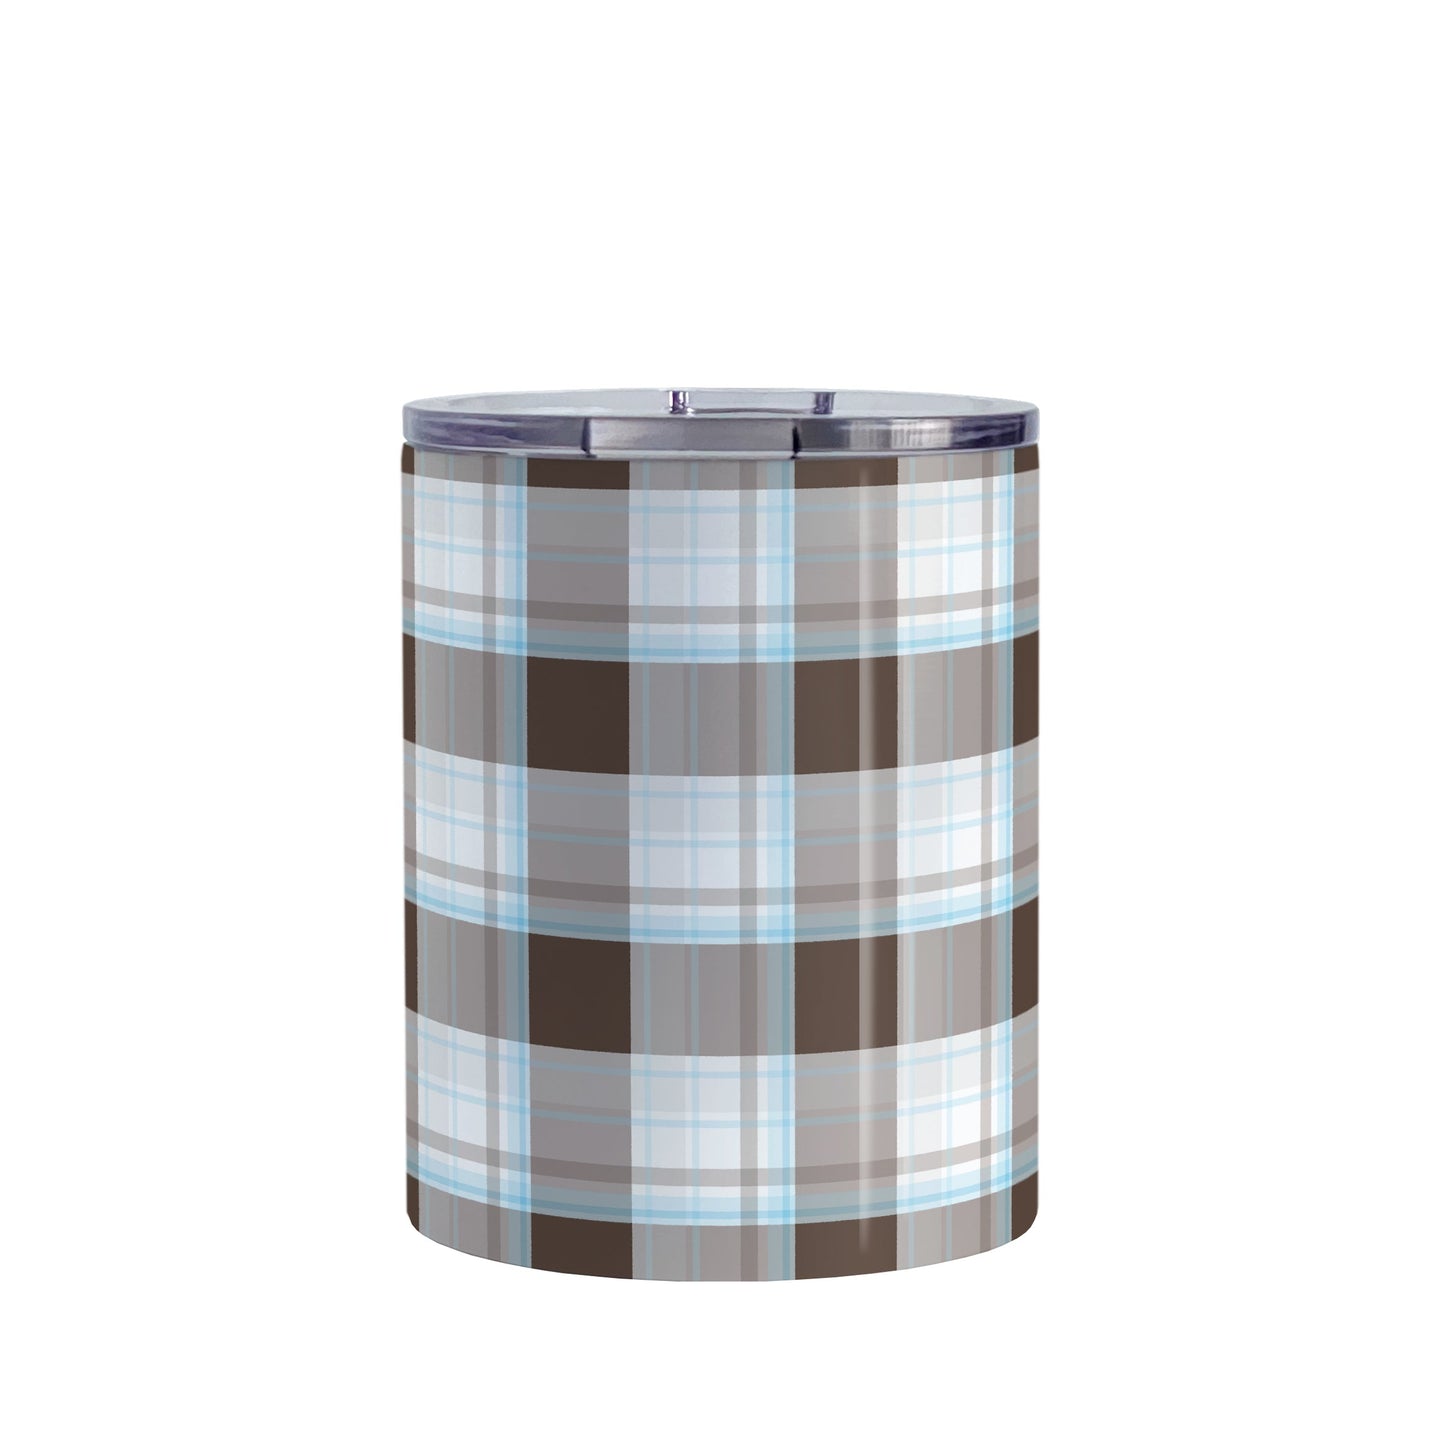 Brown Blue Plaid Tumbler Cup (10oz) at Amy's Coffee Mugs. A stainless steel insulated tumbler cup designed with a brown plaid pattern with blue accents that wraps around the cup. 